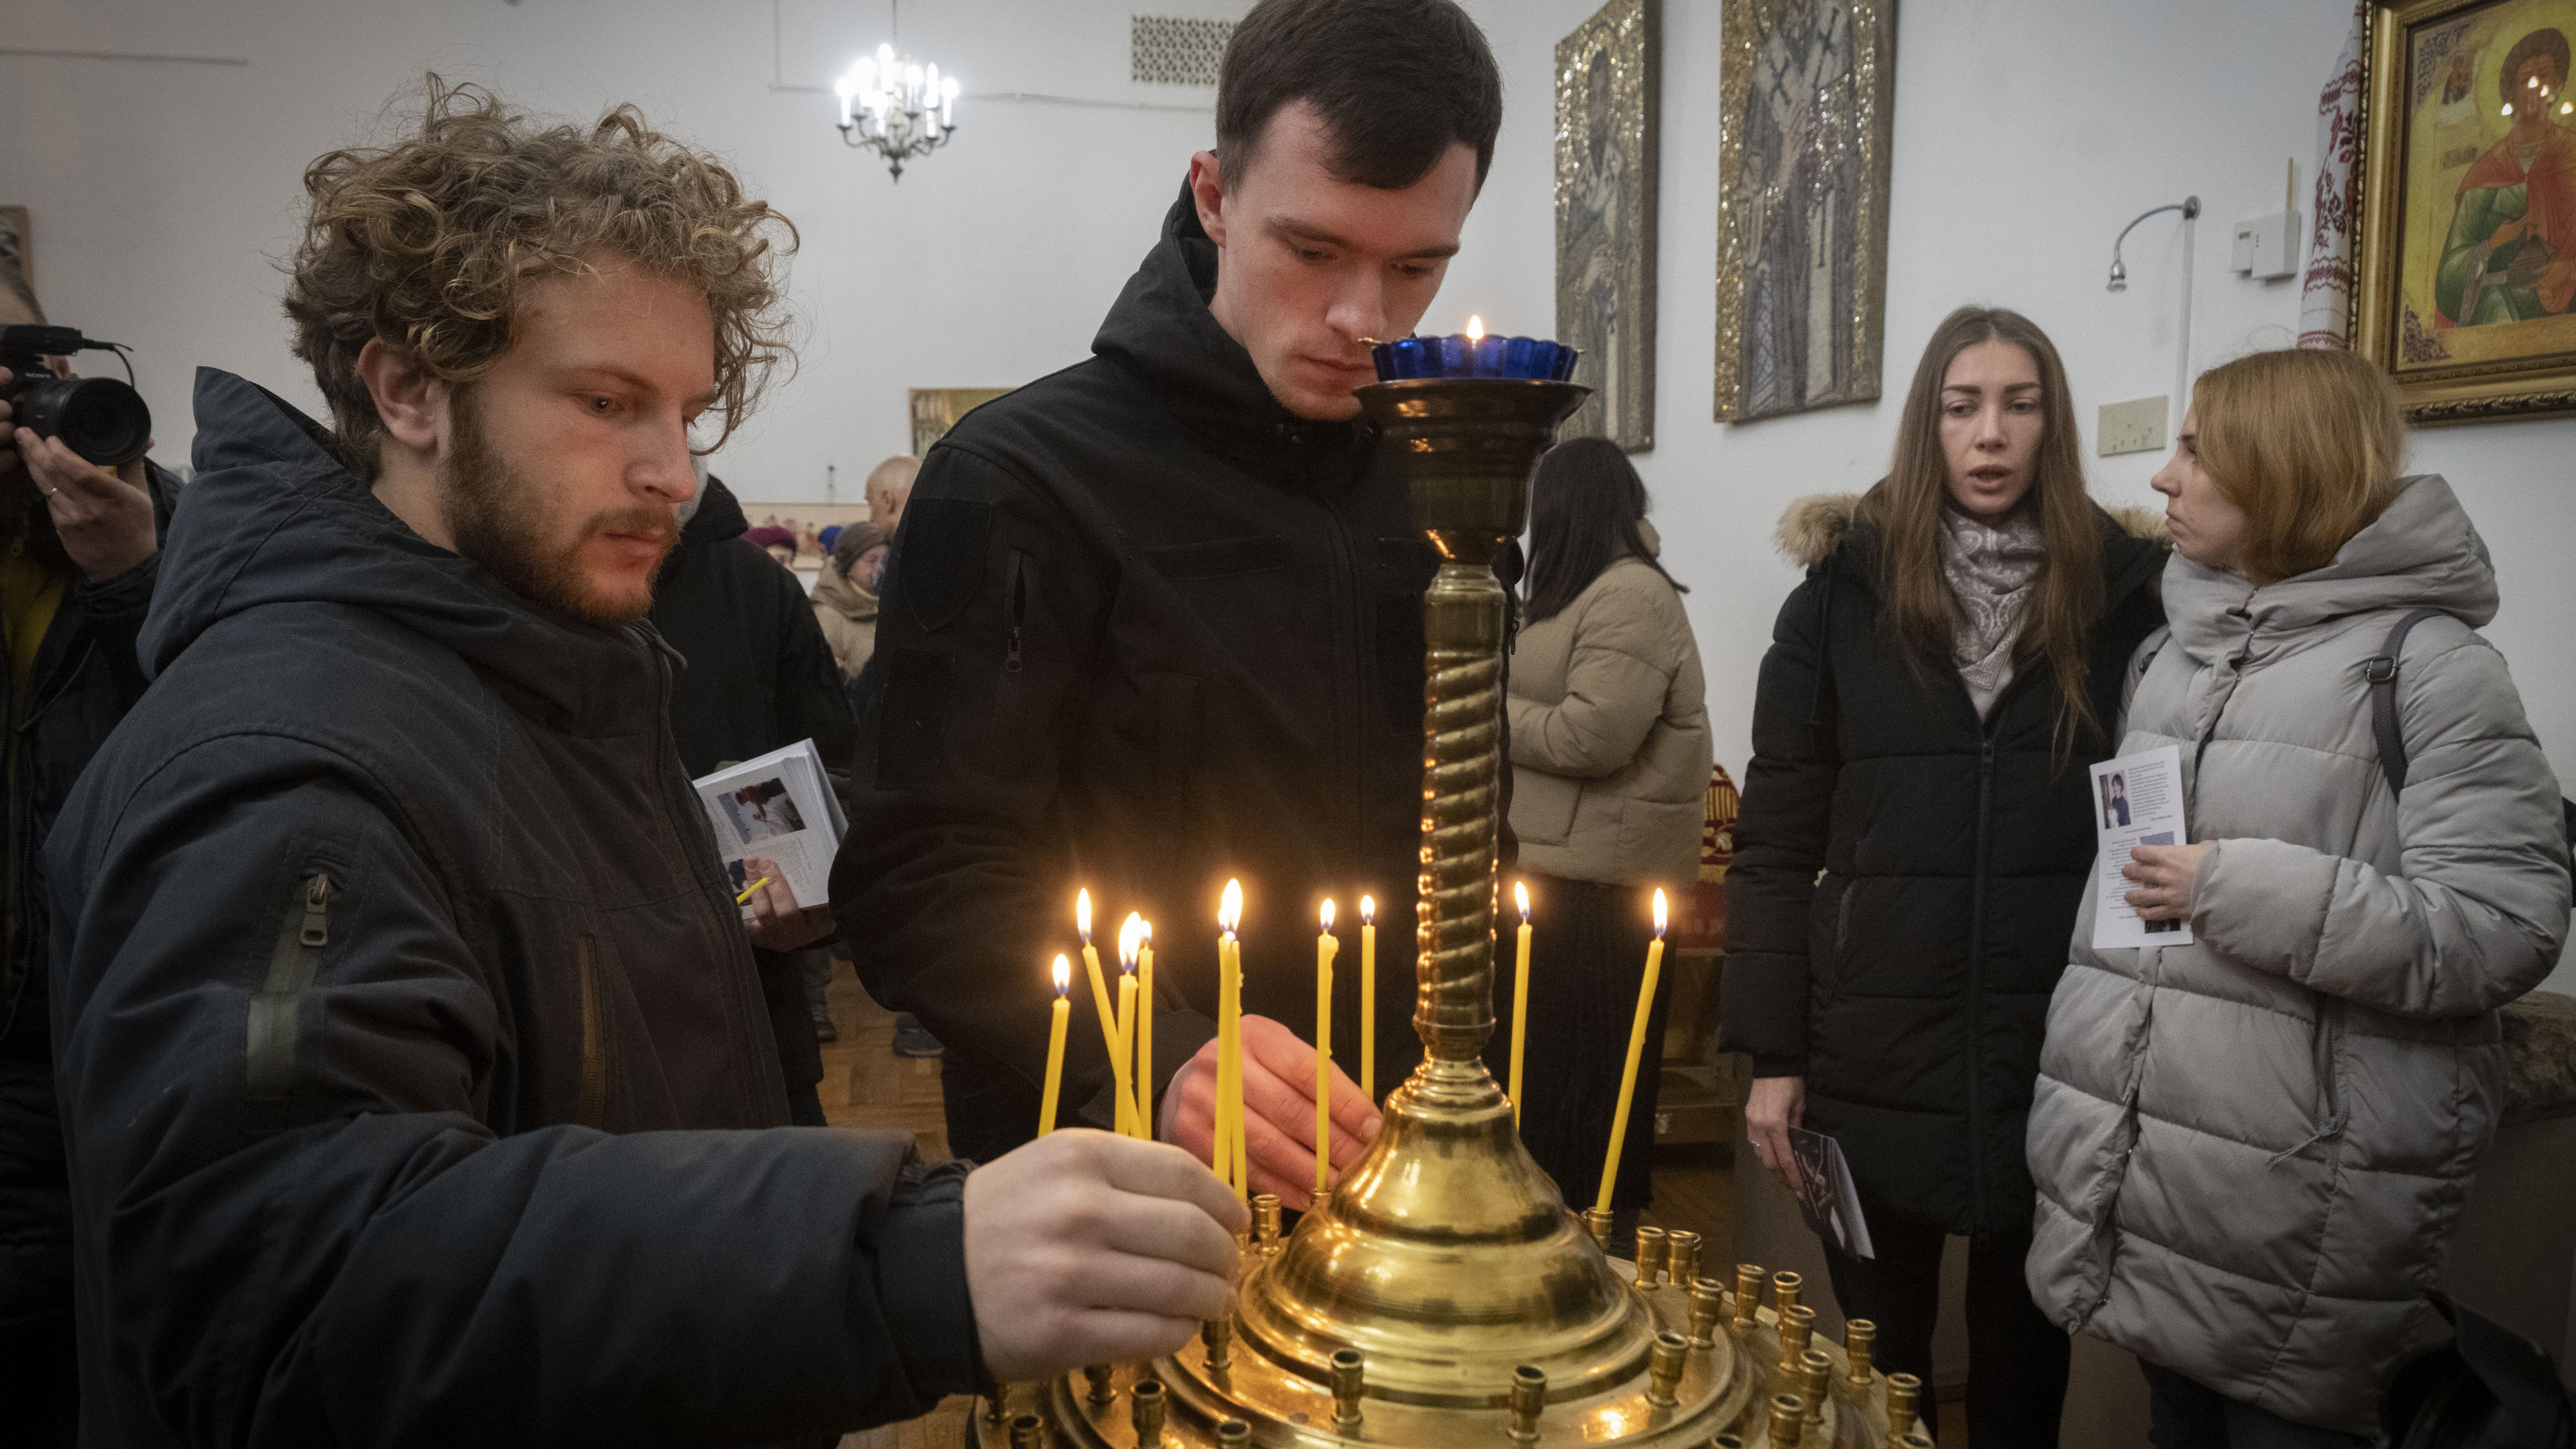 People light candles to commemorate British volunteers Chris Parry and Andrew Bagshaw, killed in Ukraine's war-hit east, during commemorating service in a refectory near St. Sophia Cathedral in Kyiv, Ukraine.